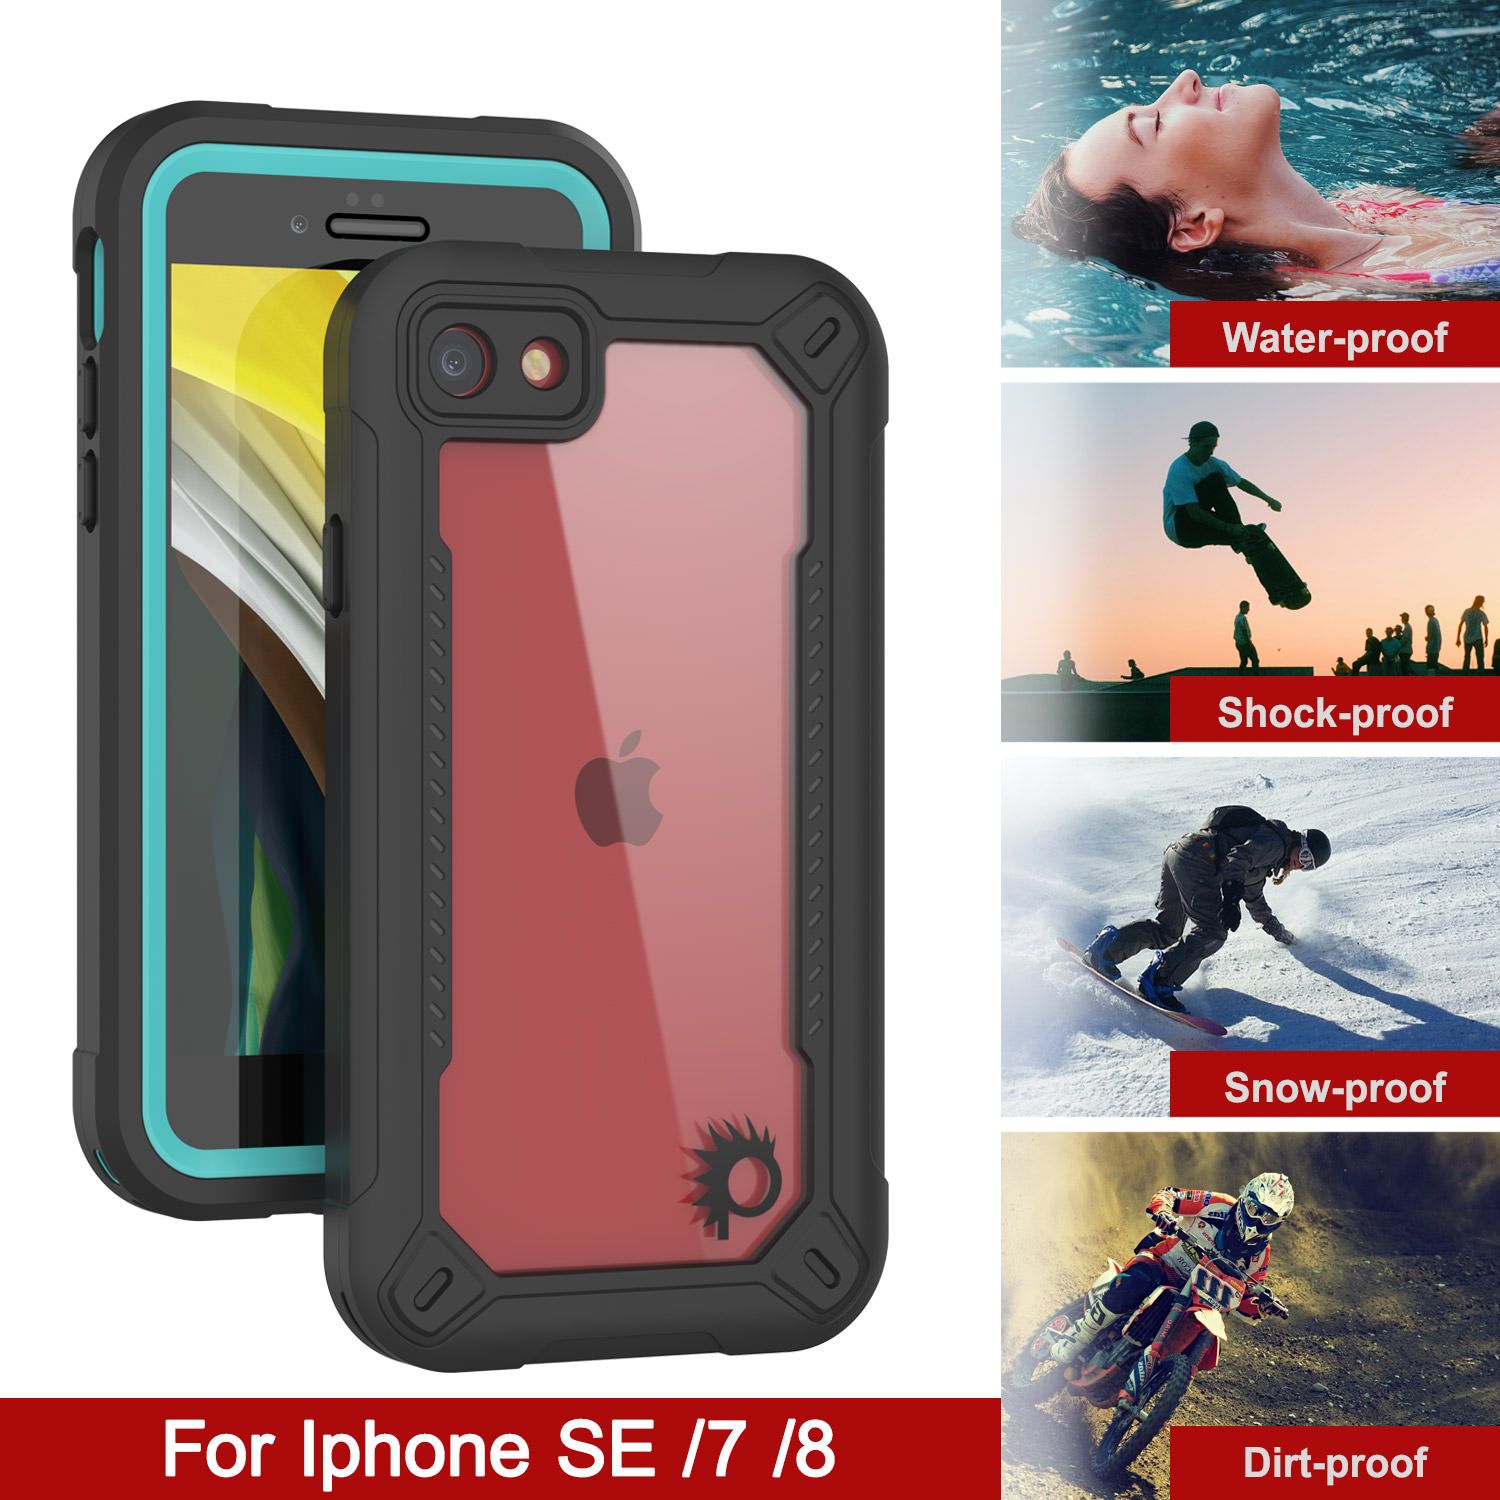 iPhone 8 Waterproof IP68 Case, Punkcase [teal]  [Maximus Series] [Slim Fit] [IP68 Certified] [Shockresistant] Clear Armor Cover with Screen Protector | Ultimate Protection